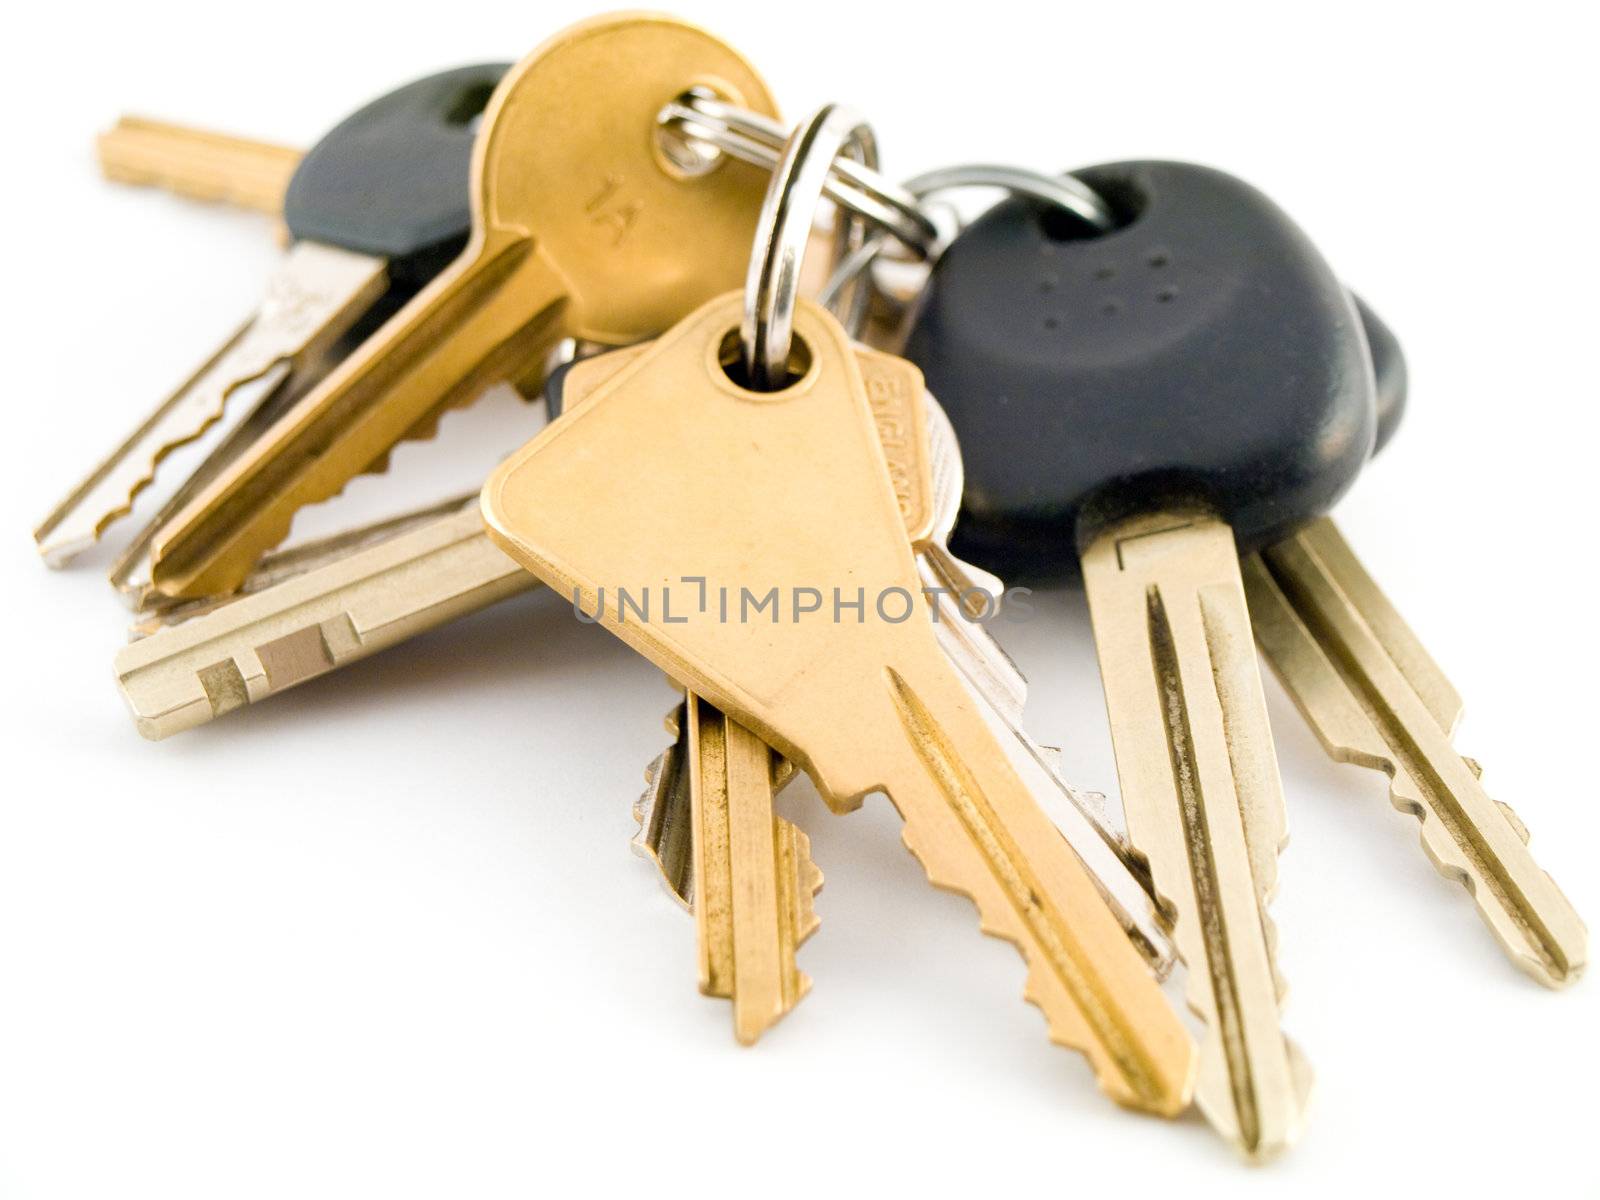 Set of House and Car Keys on White Background by bobbigmac